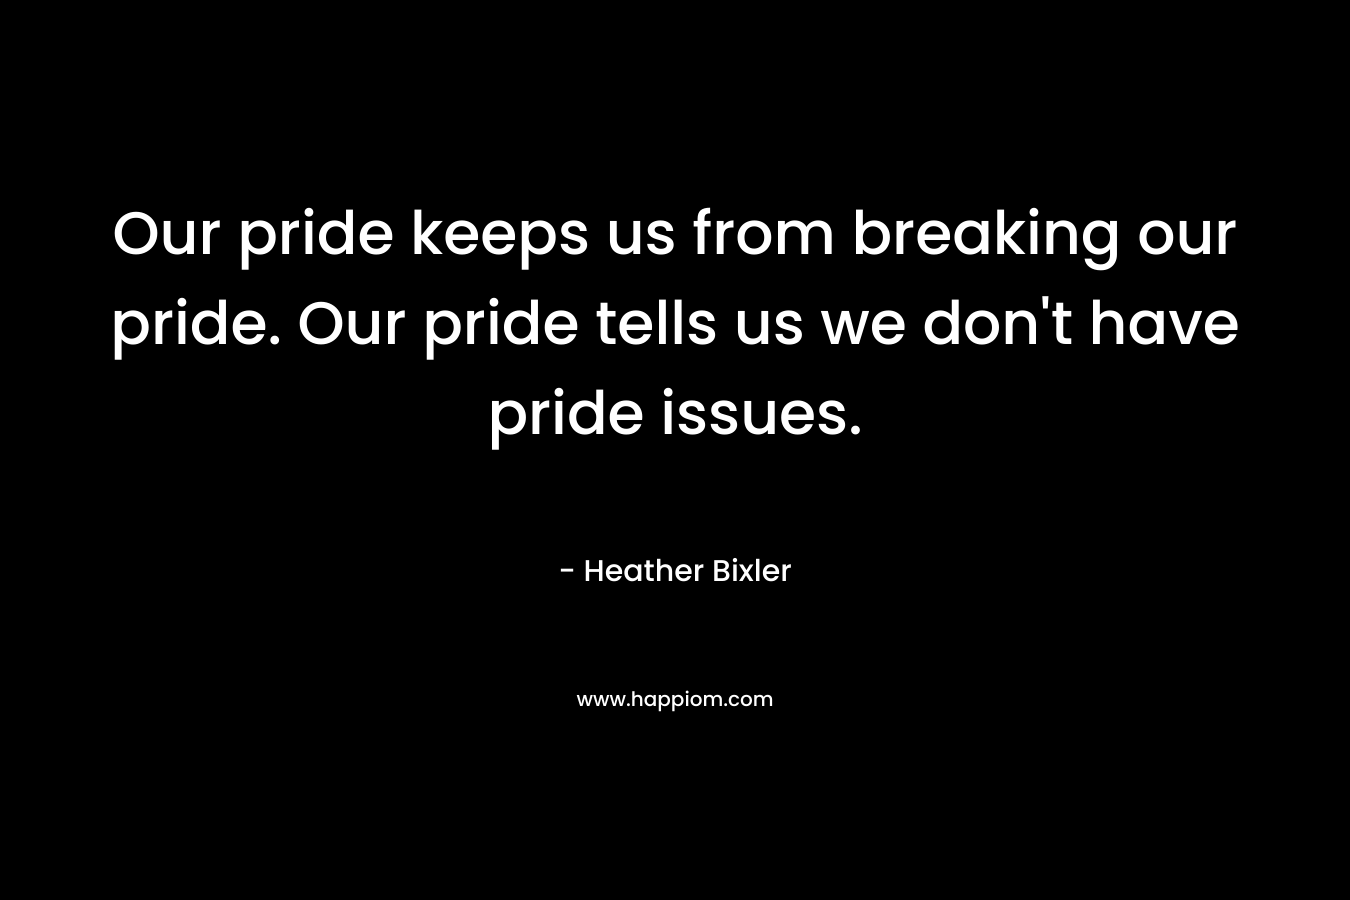 Our pride keeps us from breaking our pride. Our pride tells us we don’t have pride issues. – Heather Bixler